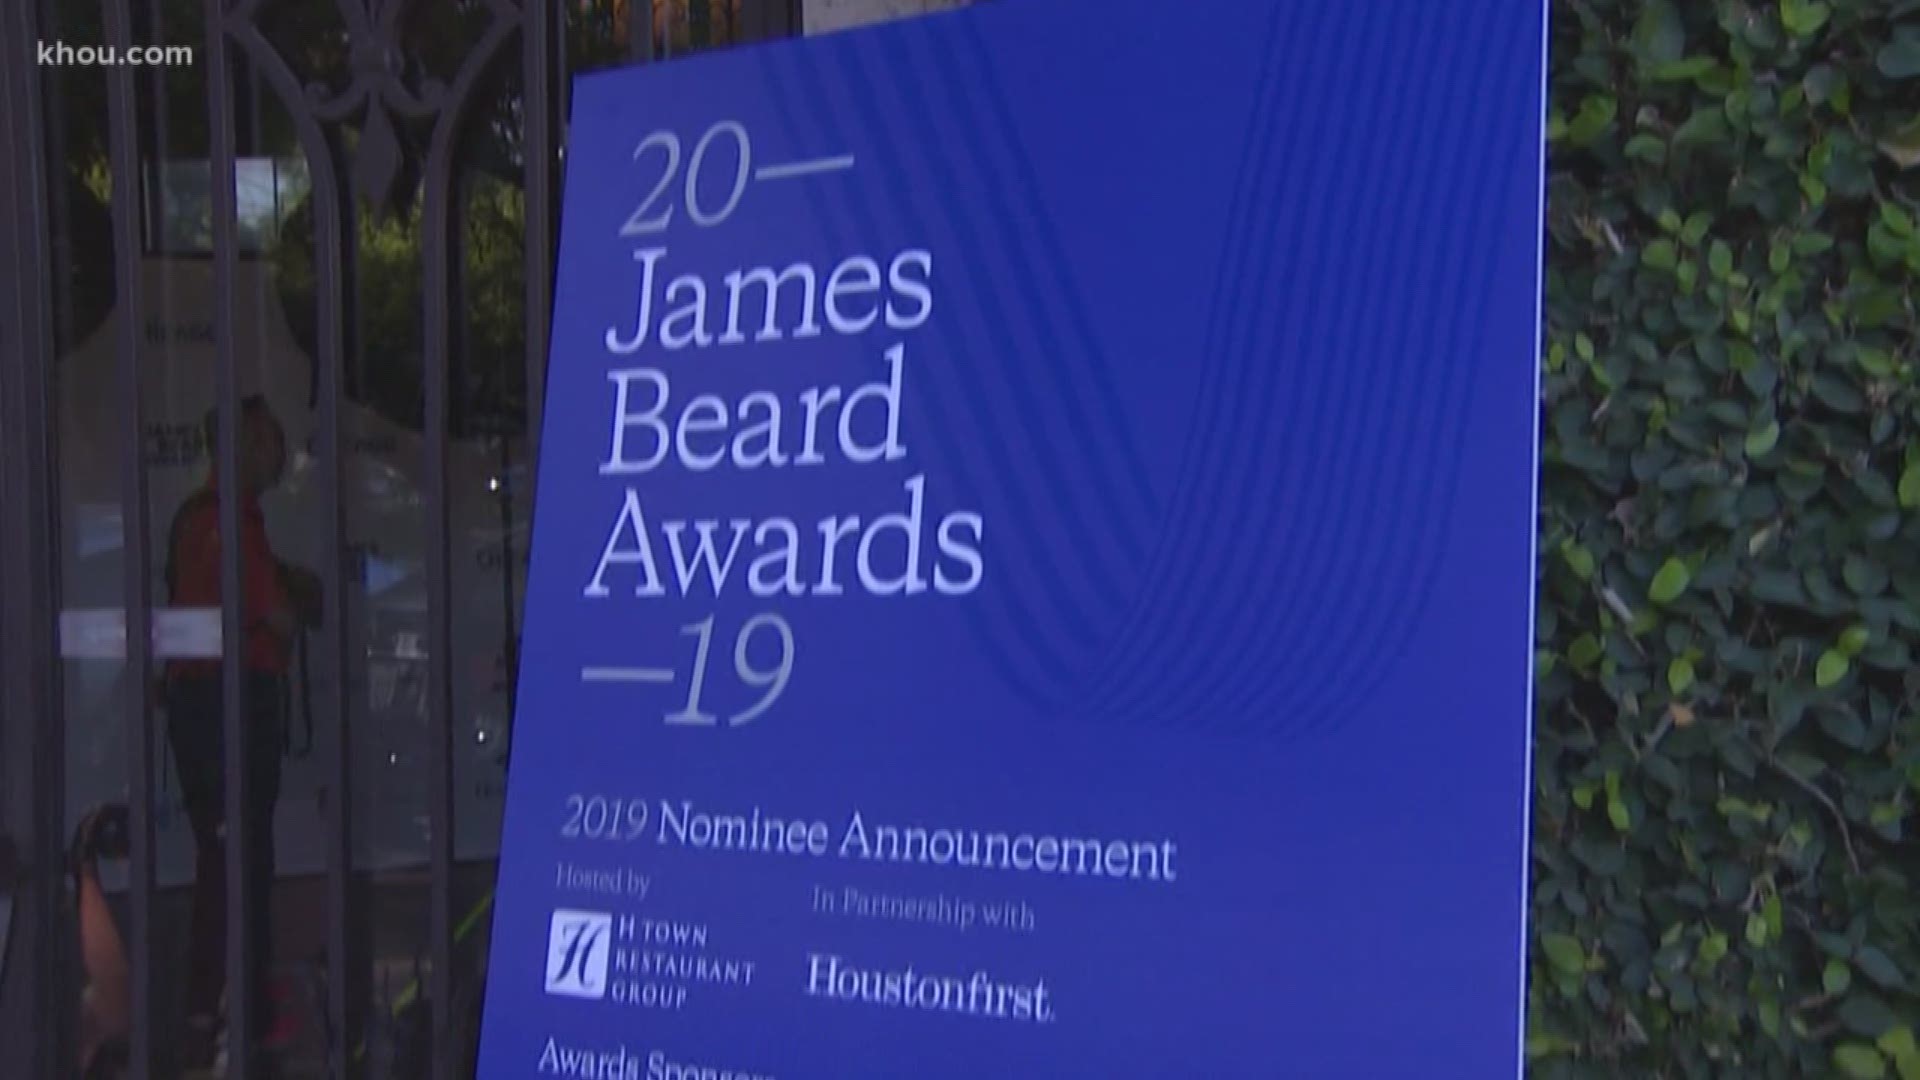 Sadly, no Houston names made the final list of nominees for the James Beard Award, but nearly a dozen came close.